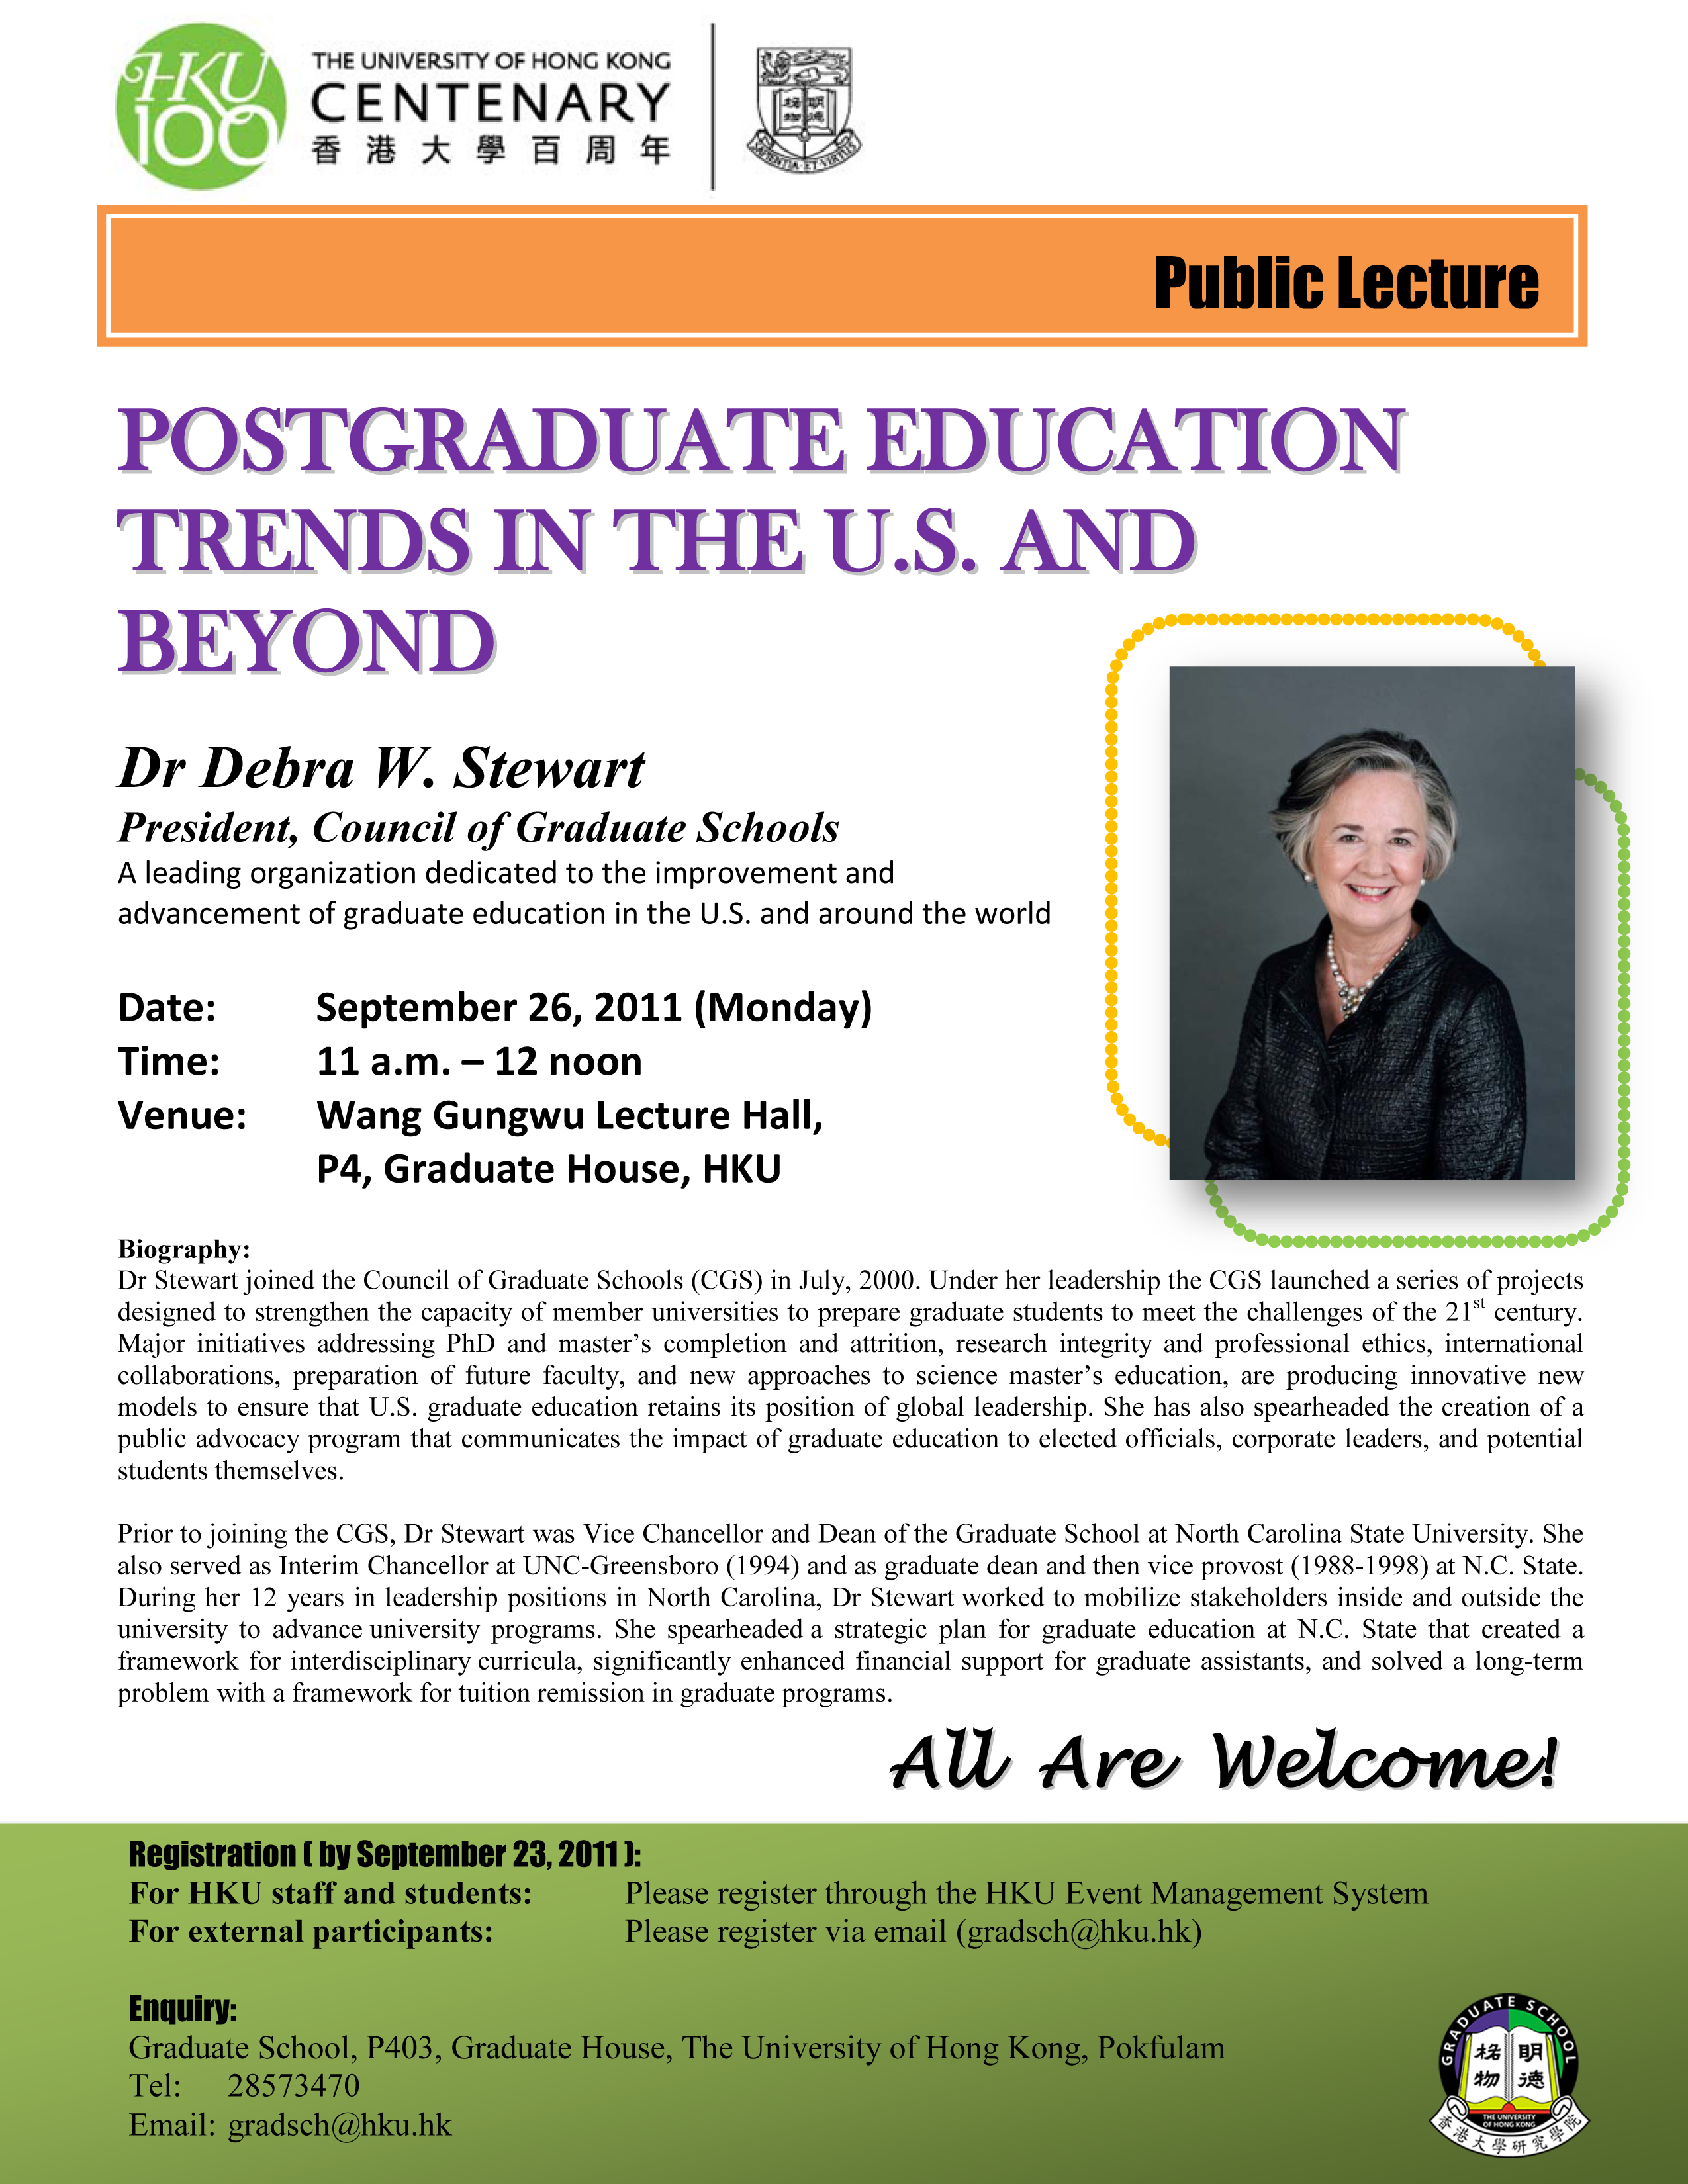 “Postgraduate Education Trends in the U.S. and Beyond” – Public Lecture by Dr Debra W. Stewart